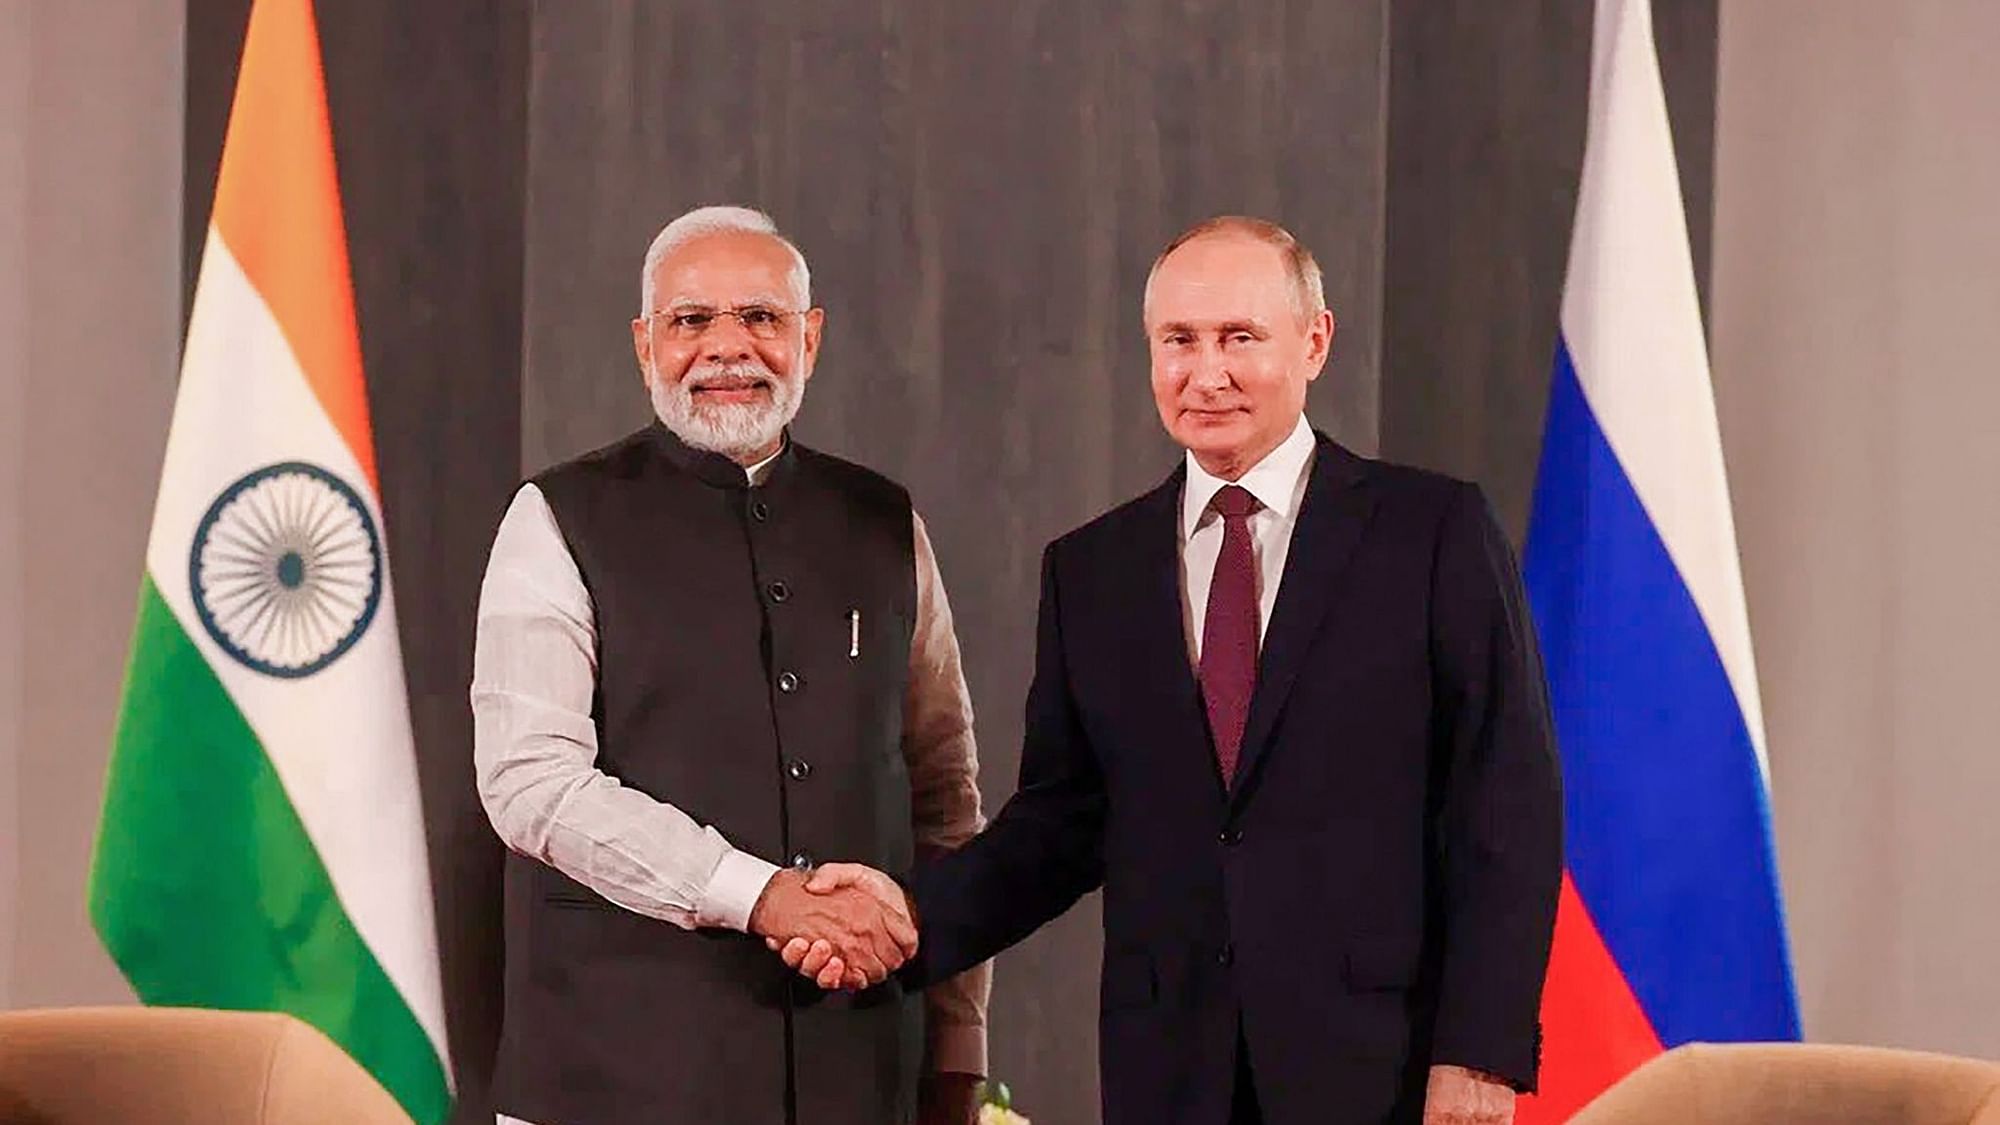 ‘Russia Supports New Delhi Declaration’: Putin at SCO Summit Chaired by ...